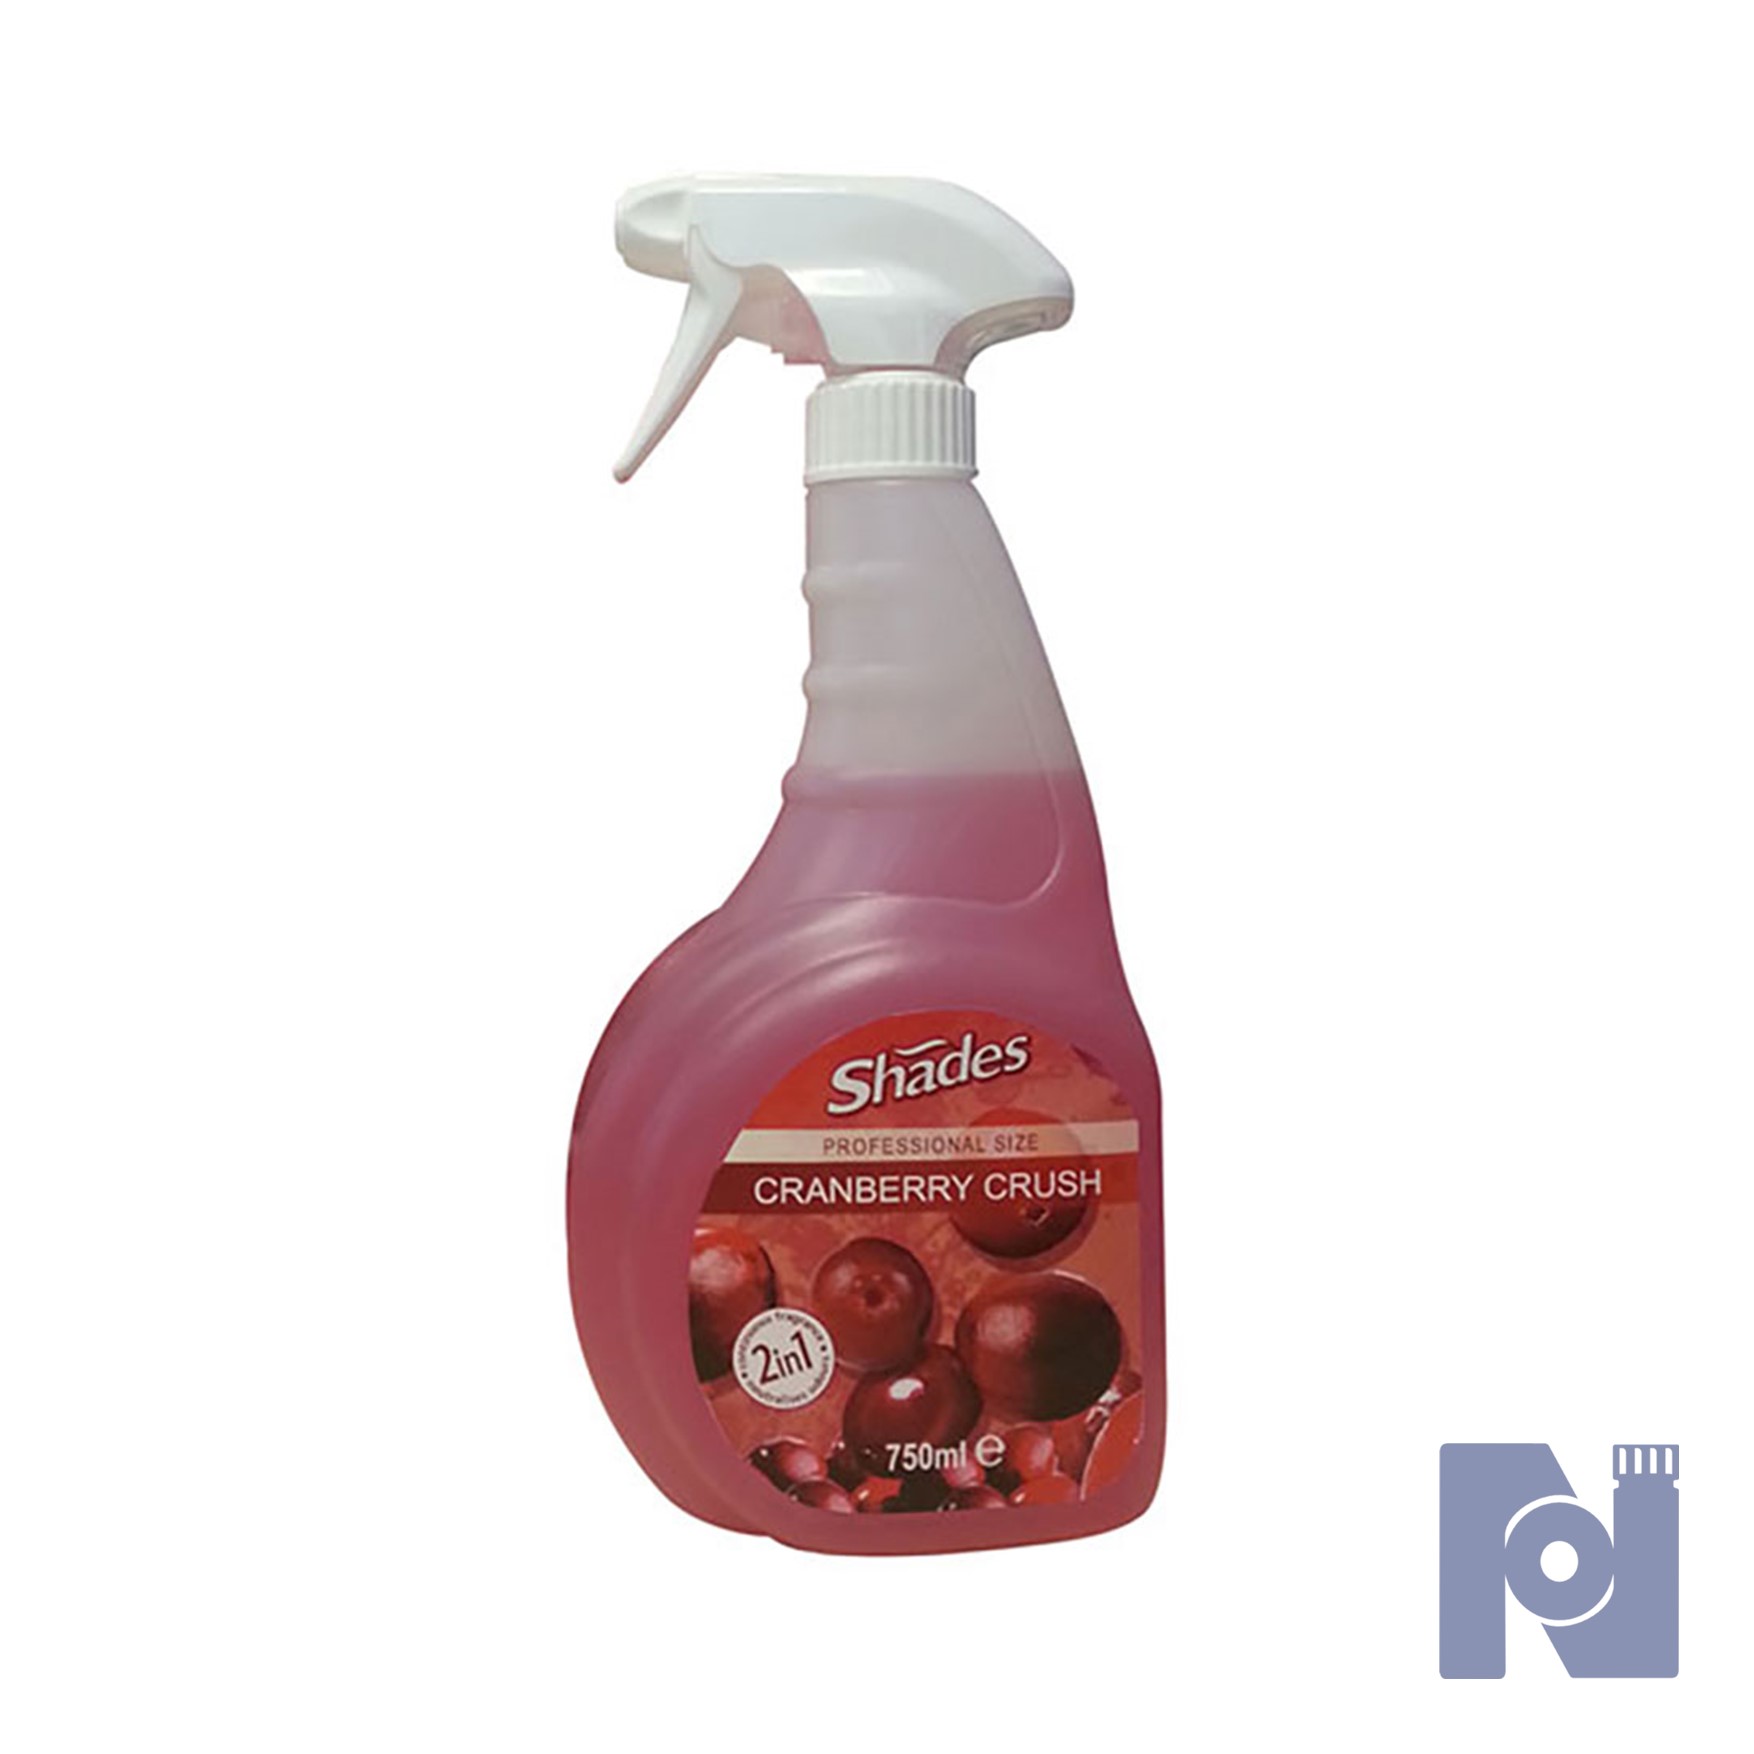 Clean & Clever Cranberry Crush Air Freshner